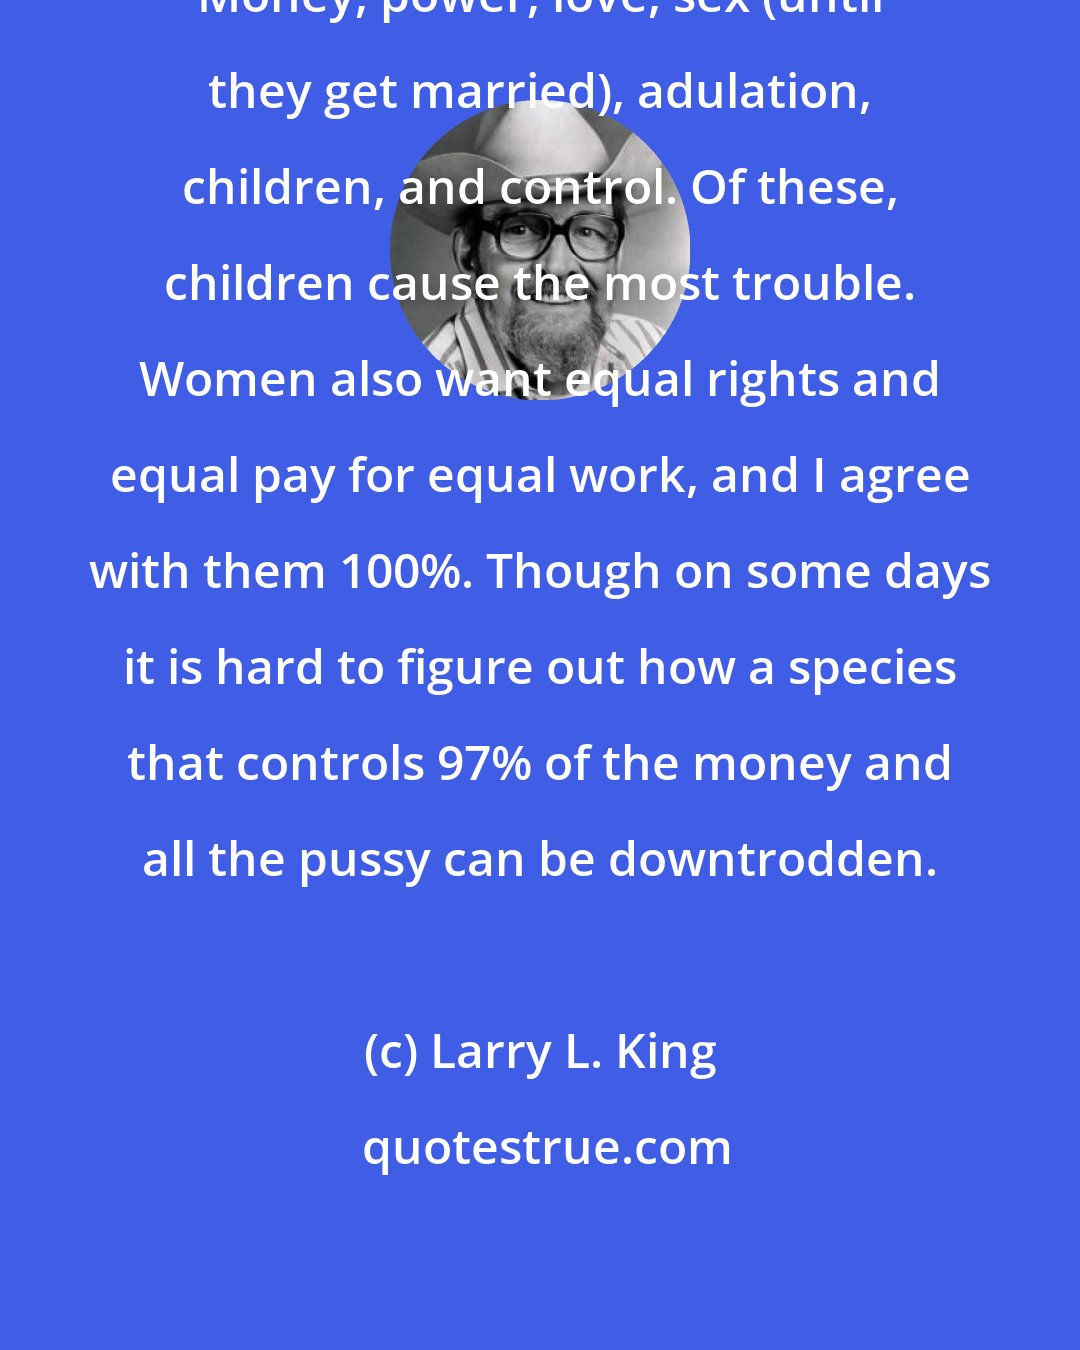 Larry L. King: Money, power, love, sex (until they get married), adulation, children, and control. Of these, children cause the most trouble. Women also want equal rights and equal pay for equal work, and I agree with them 100%. Though on some days it is hard to figure out how a species that controls 97% of the money and all the pussy can be downtrodden.